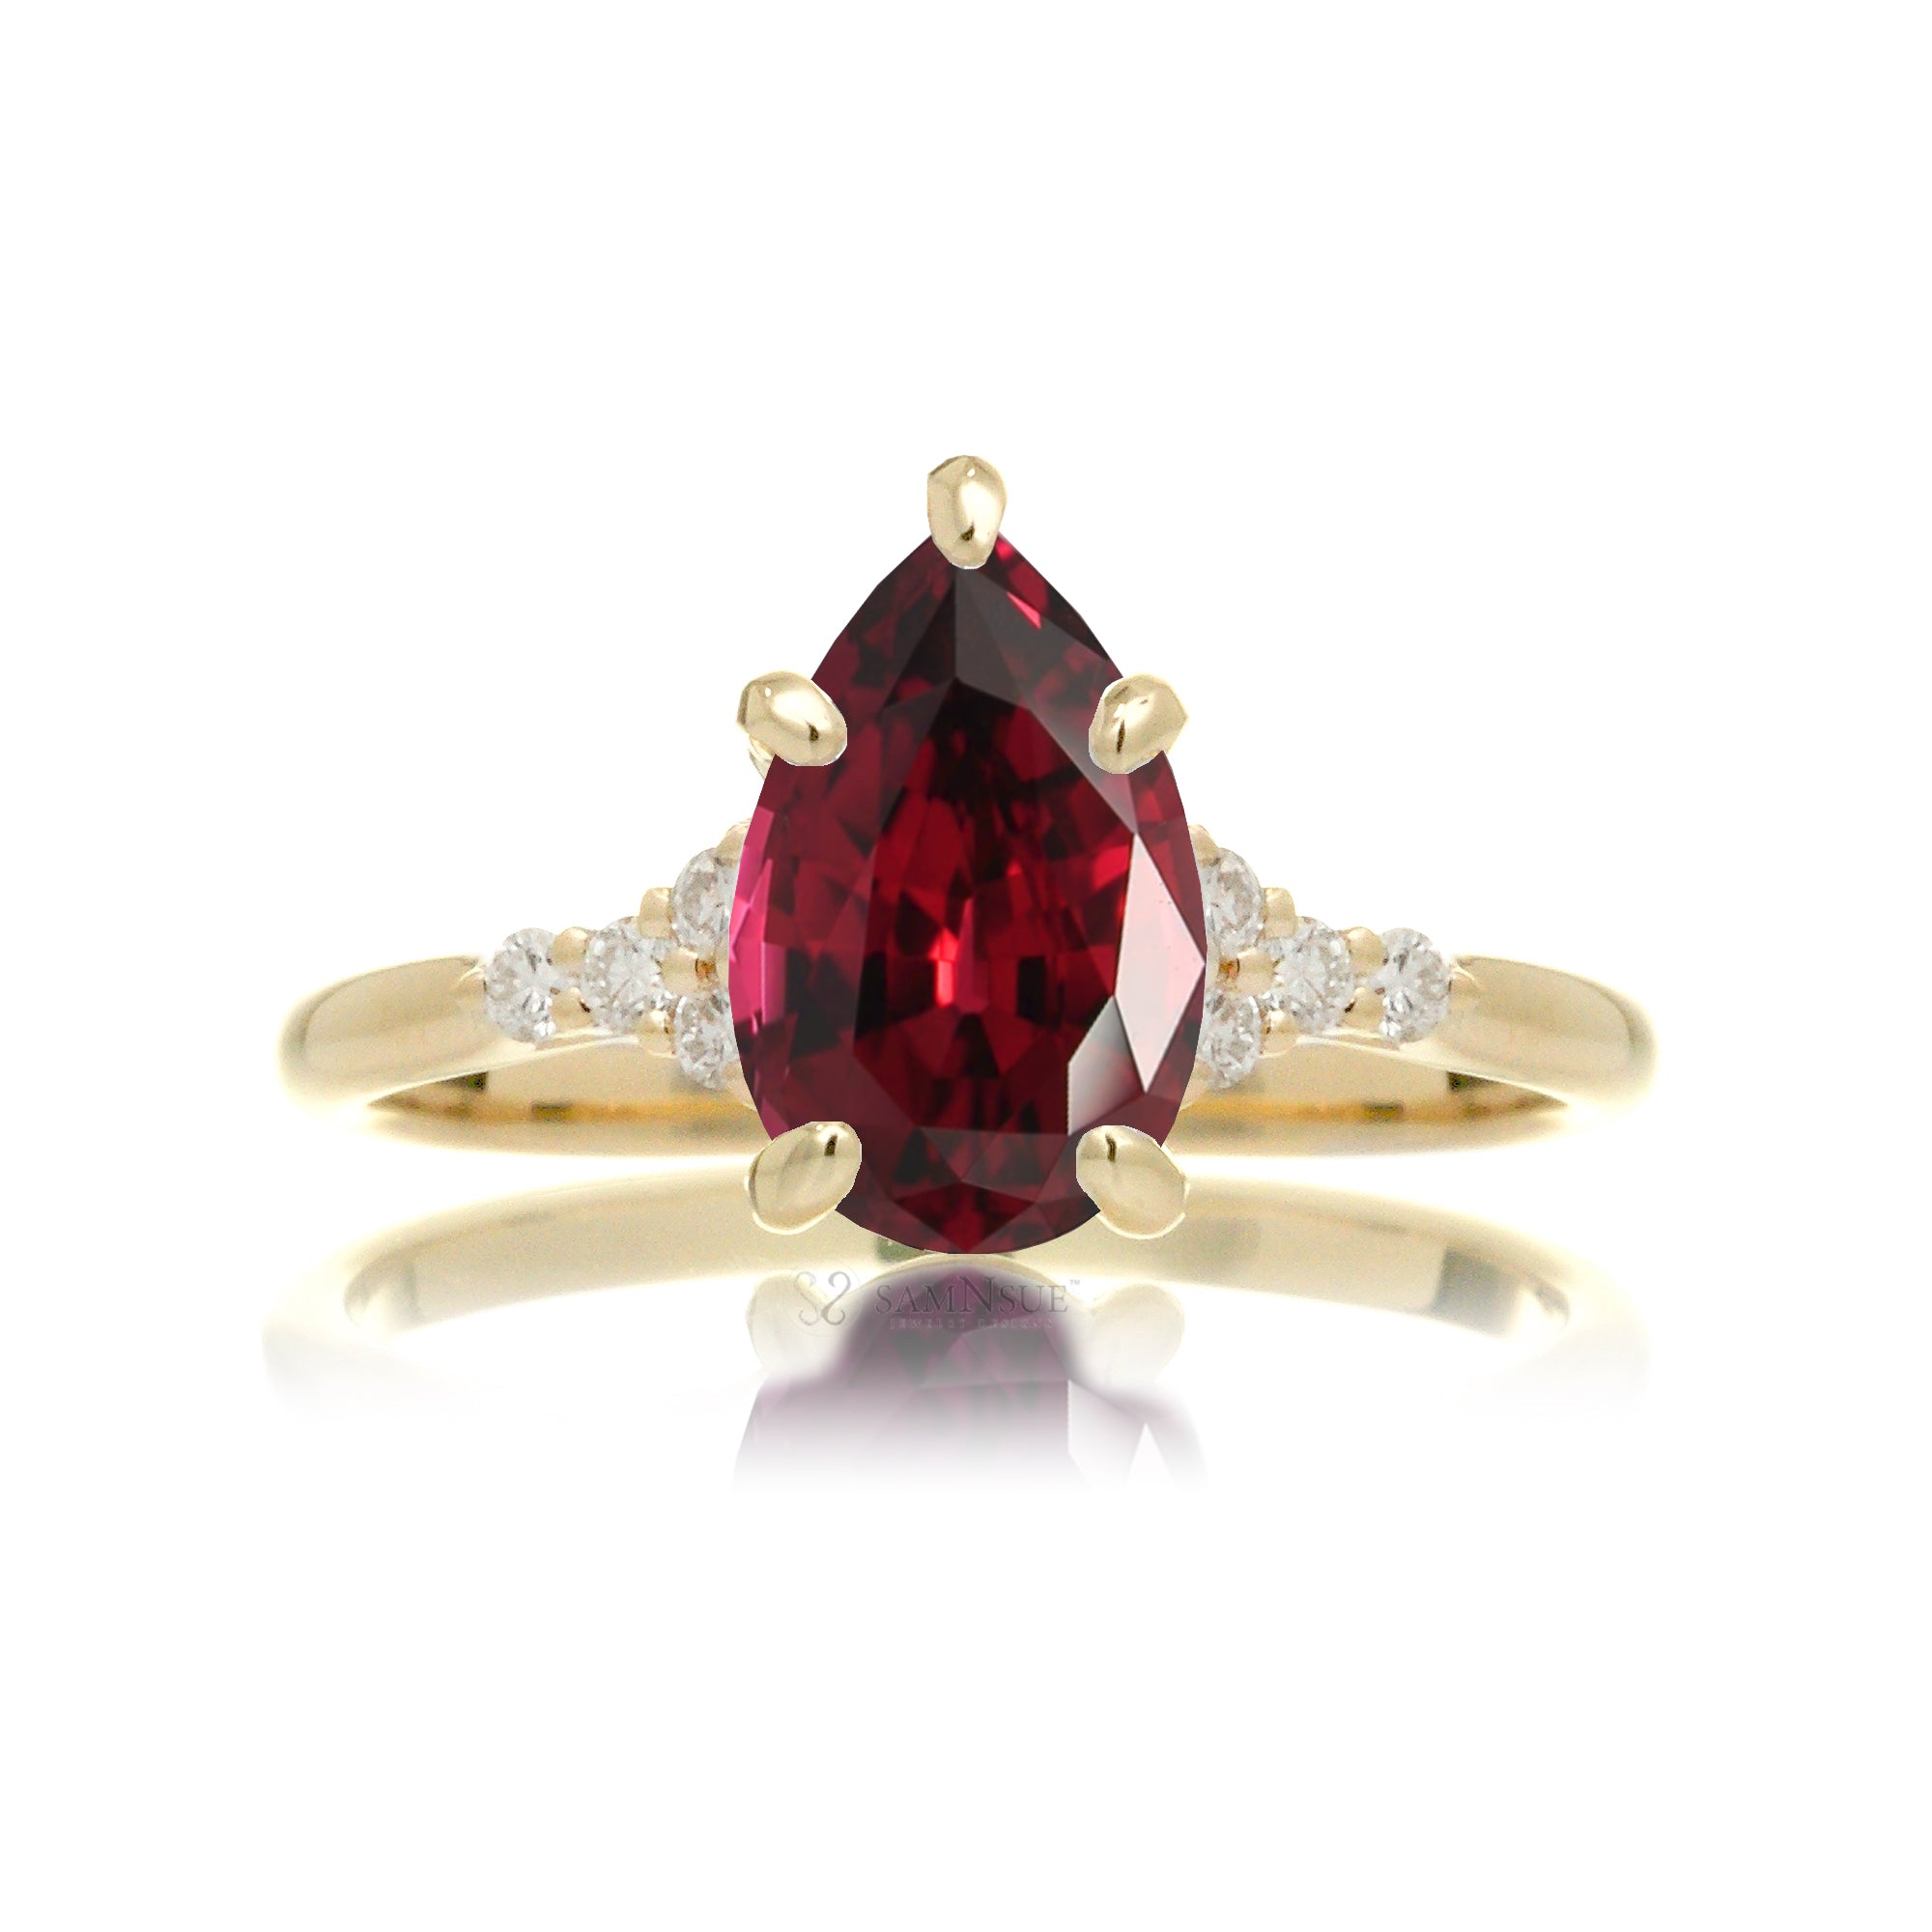 Pear cut ruby and diamond engagement ring in yellow gold - the Chloe lab-grown